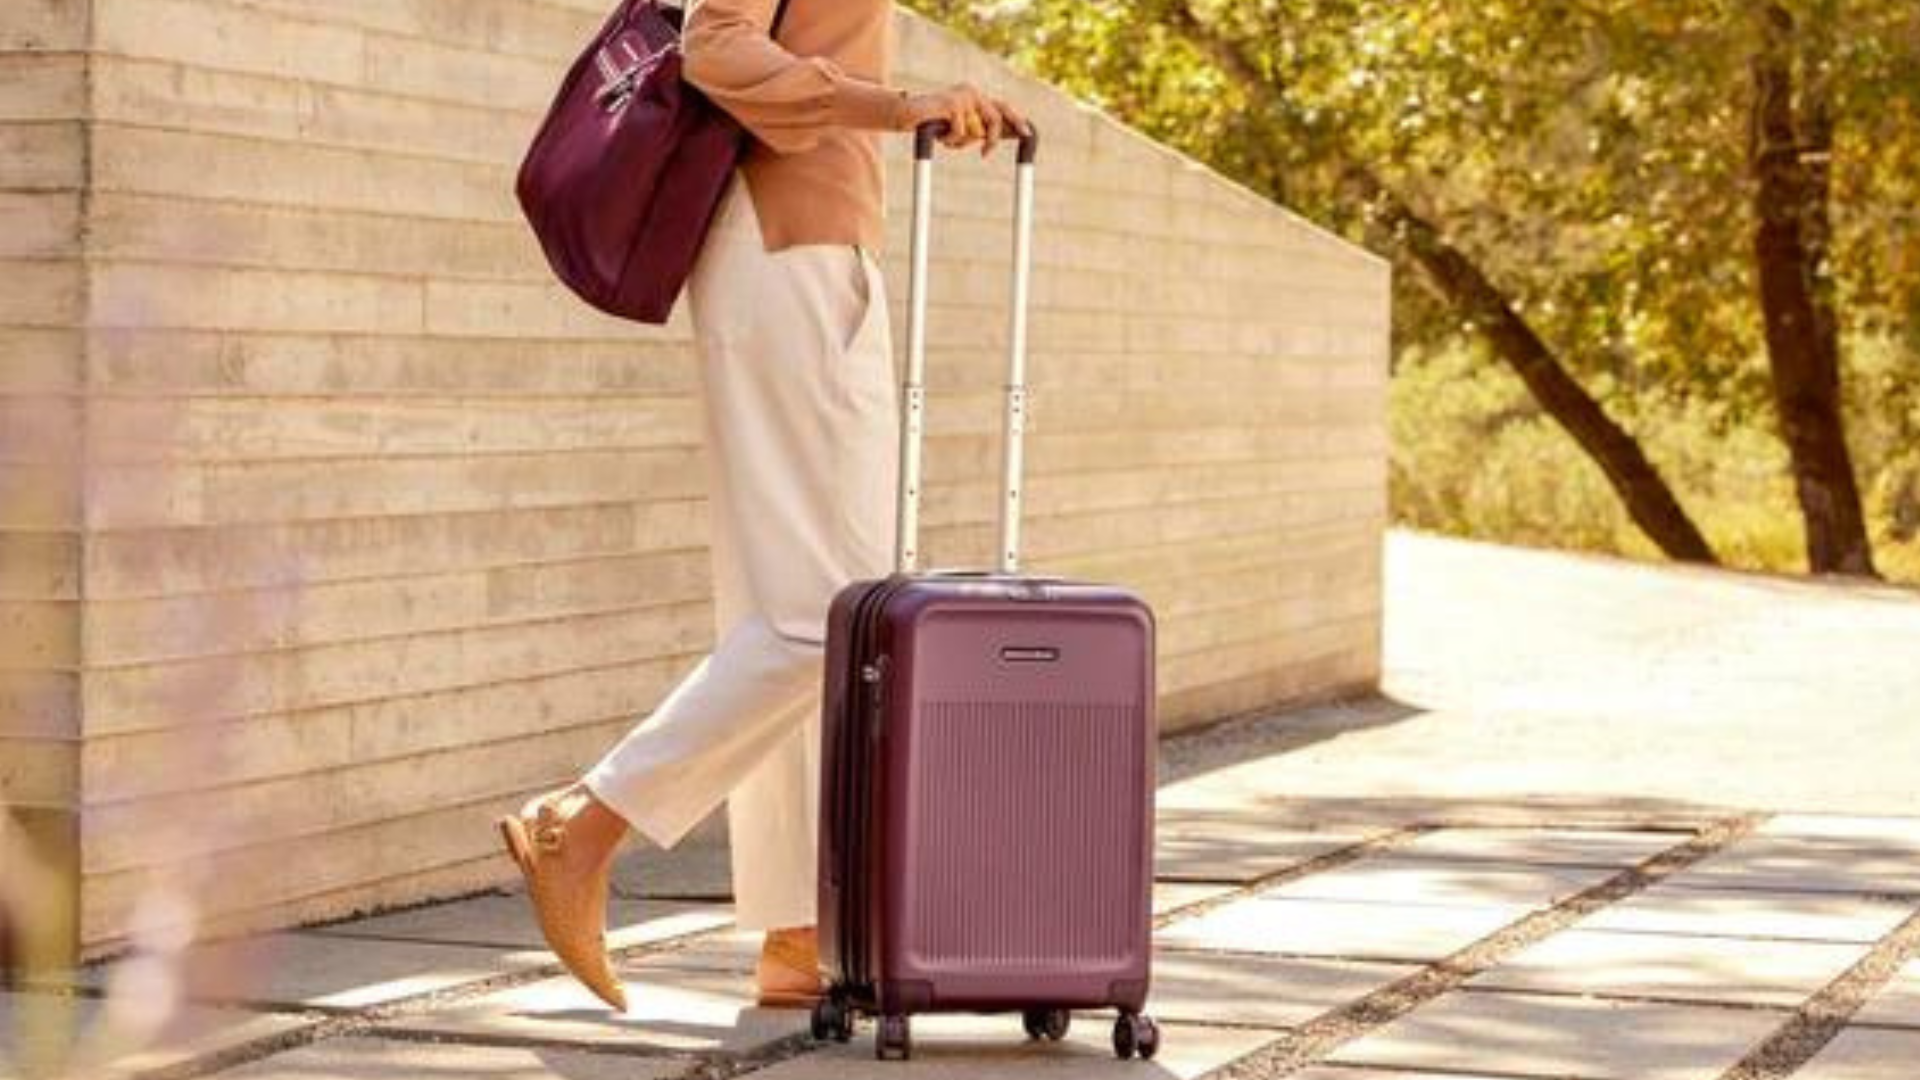 A lady holding a maroon luggage while outdoors